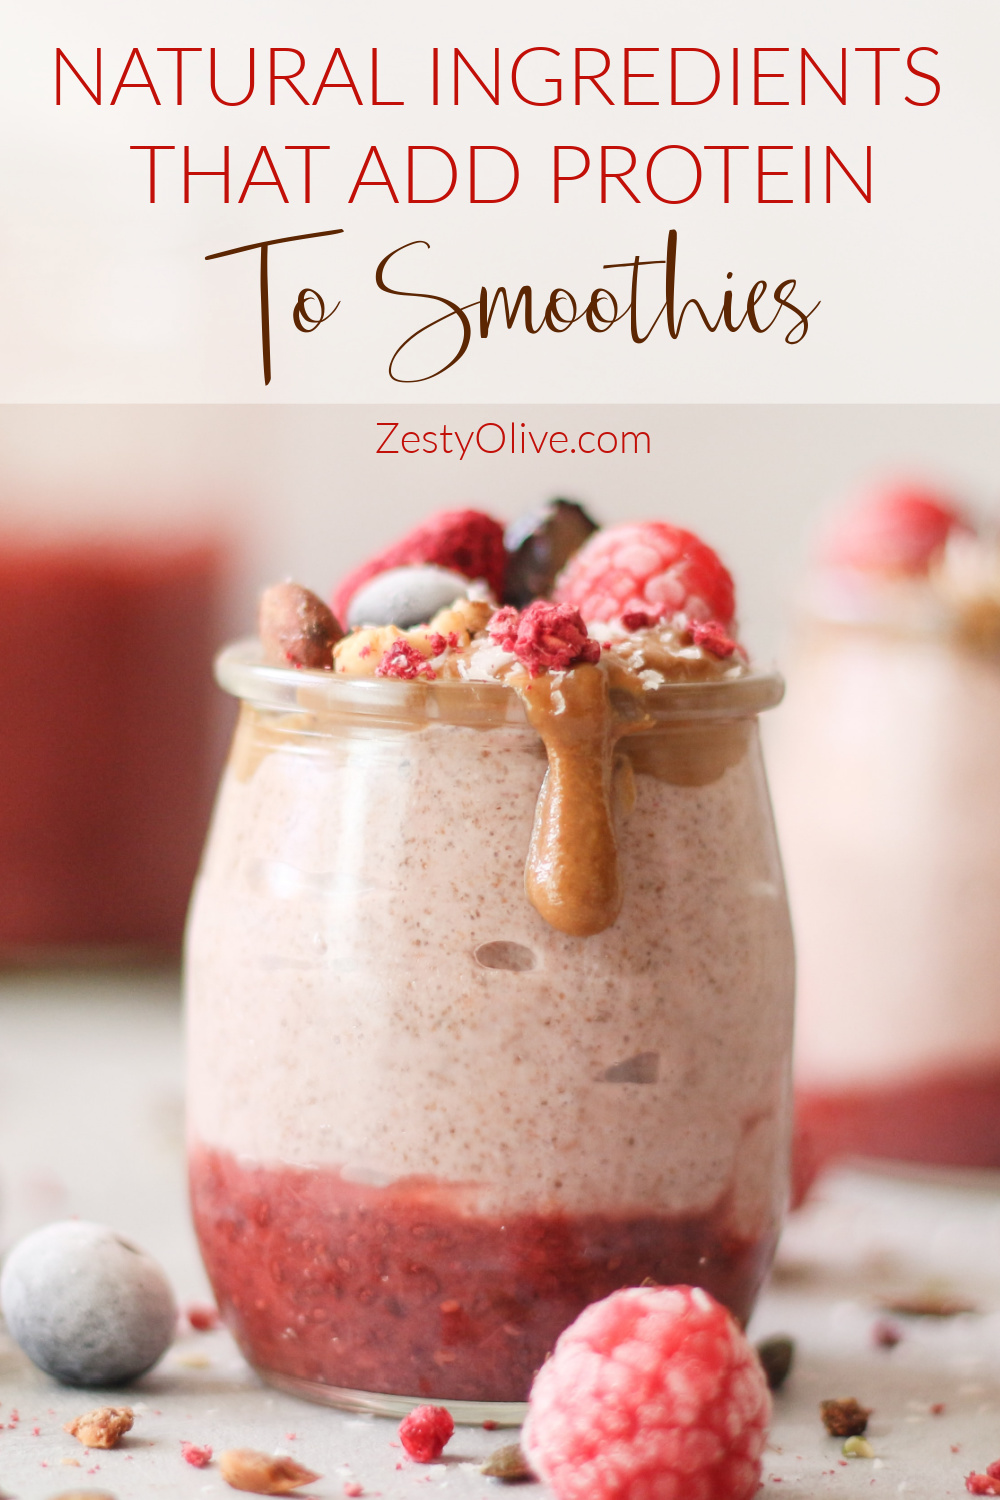 http://zestyolive.com/wp-content/uploads/2022/08/natural-ingredients-protein-smoothies.jpg